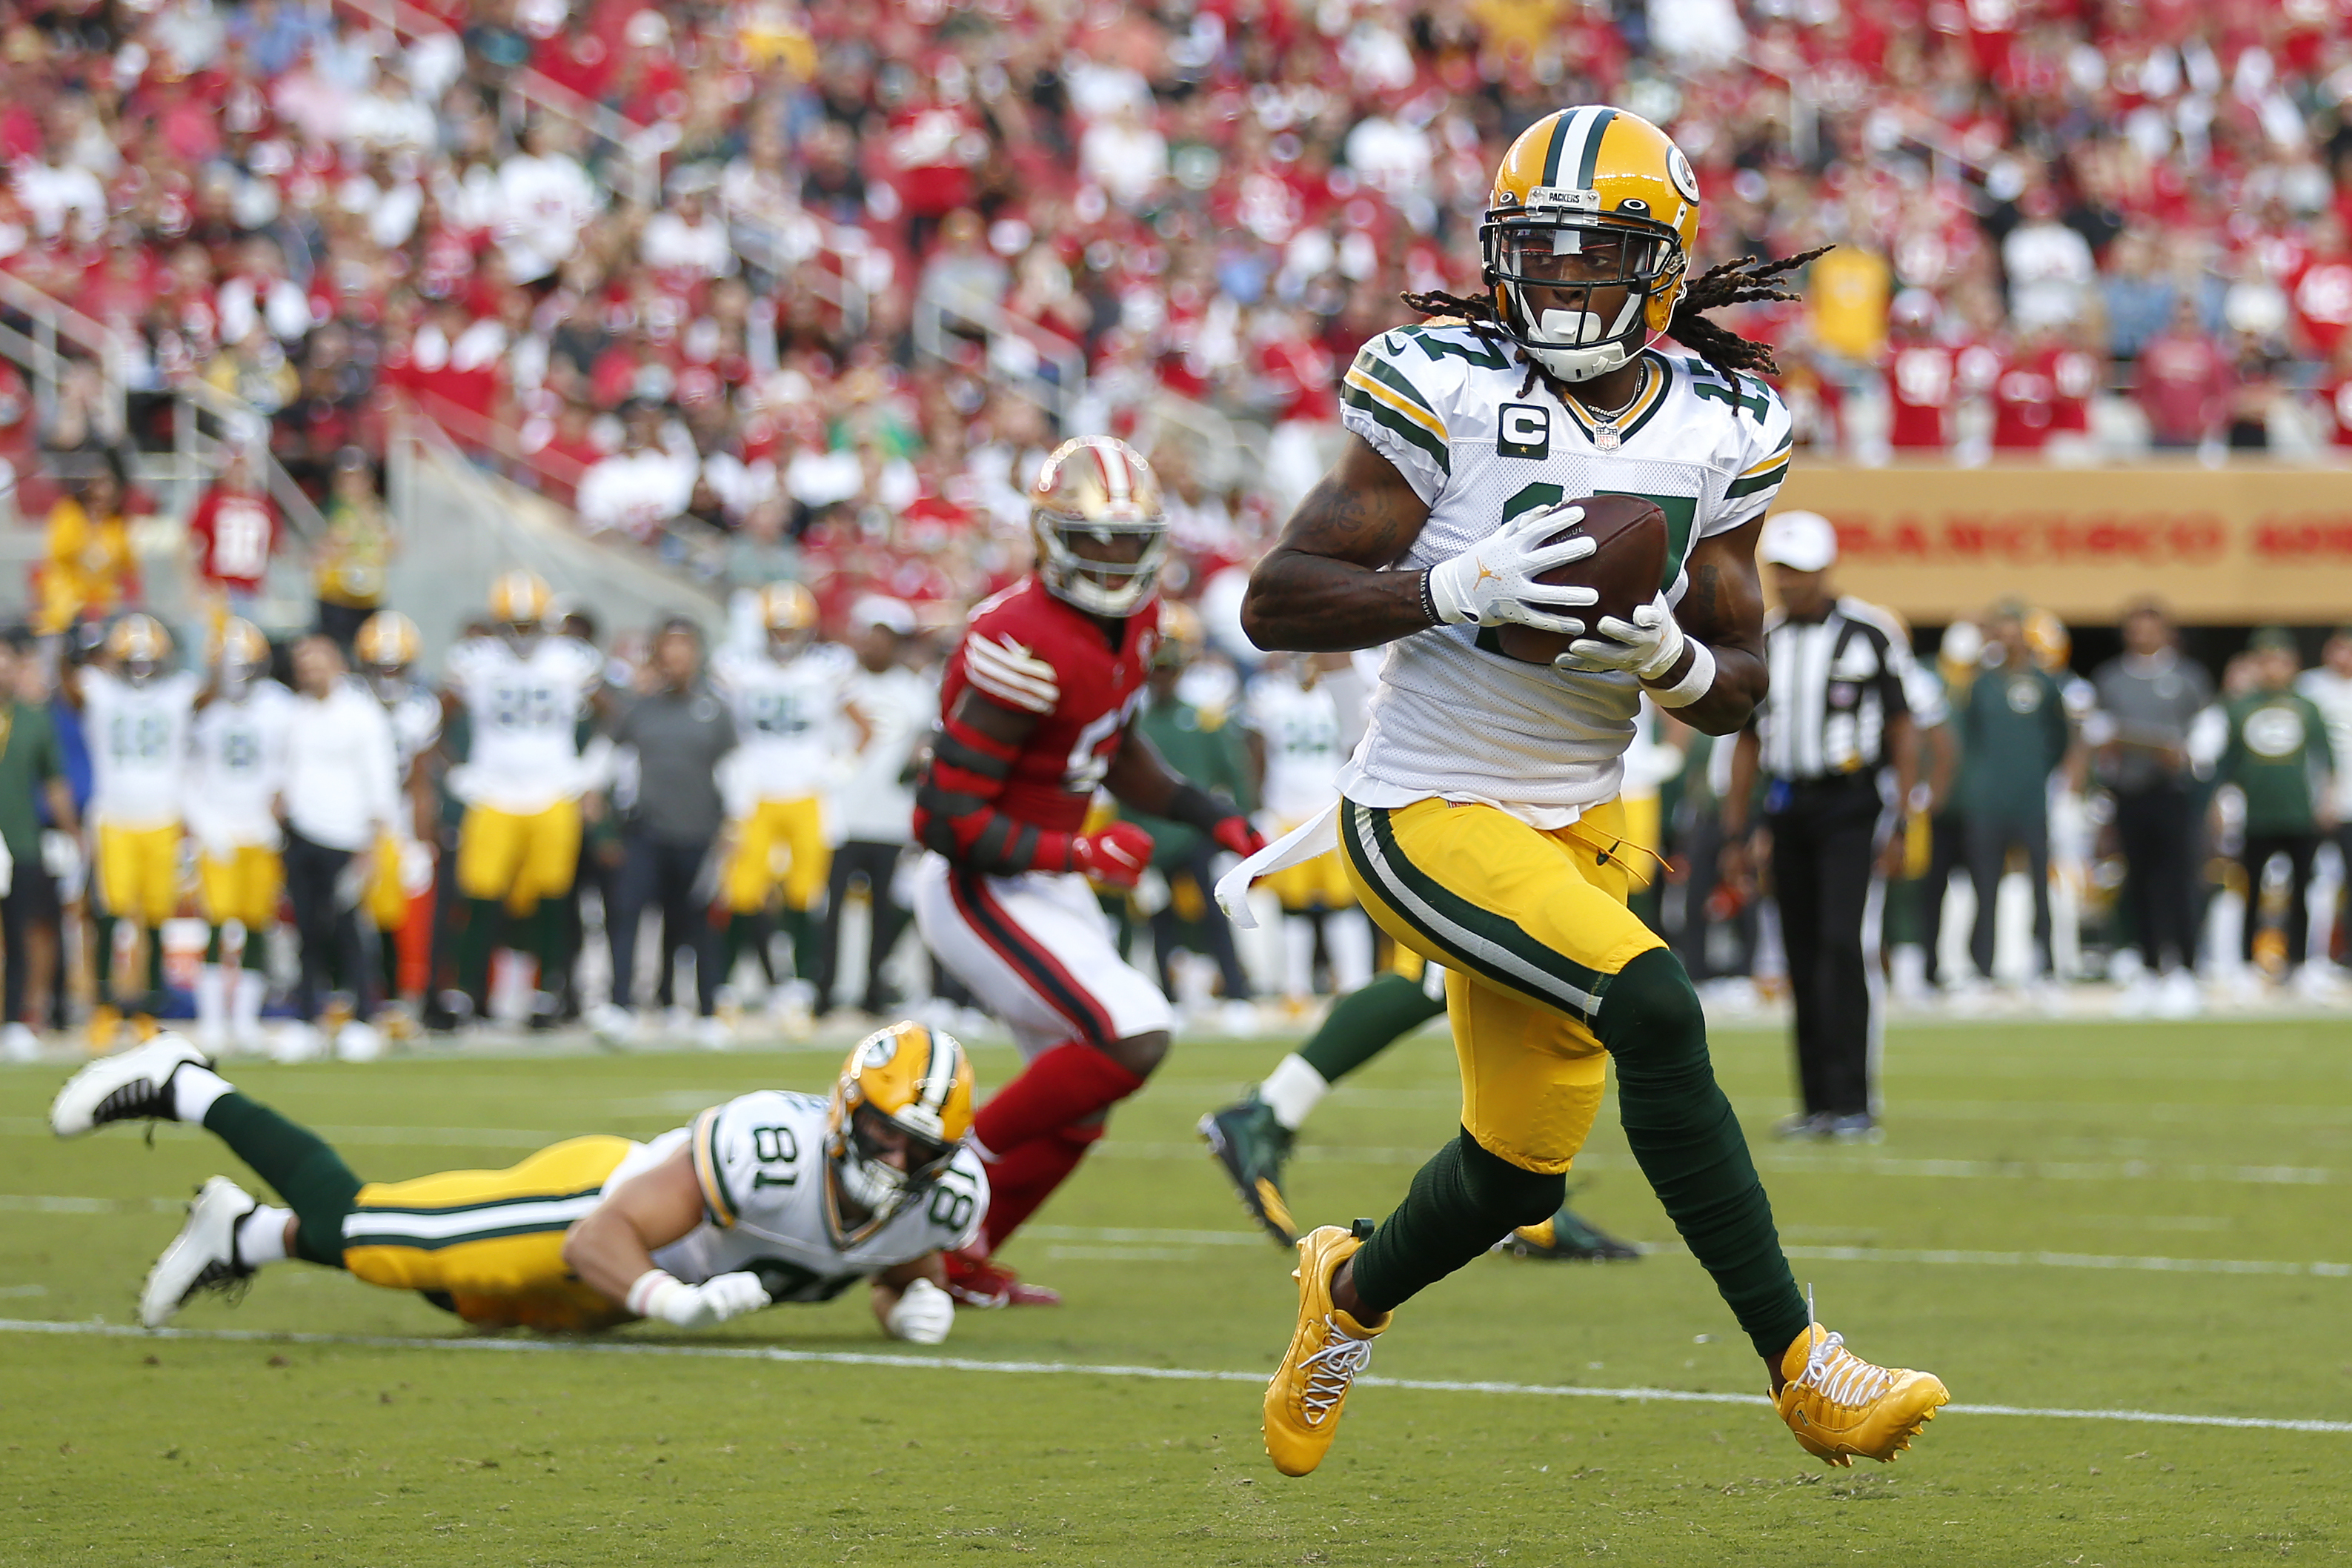 Green Bay Packers get rematch with San Francisco 49ers in NFC playoffs